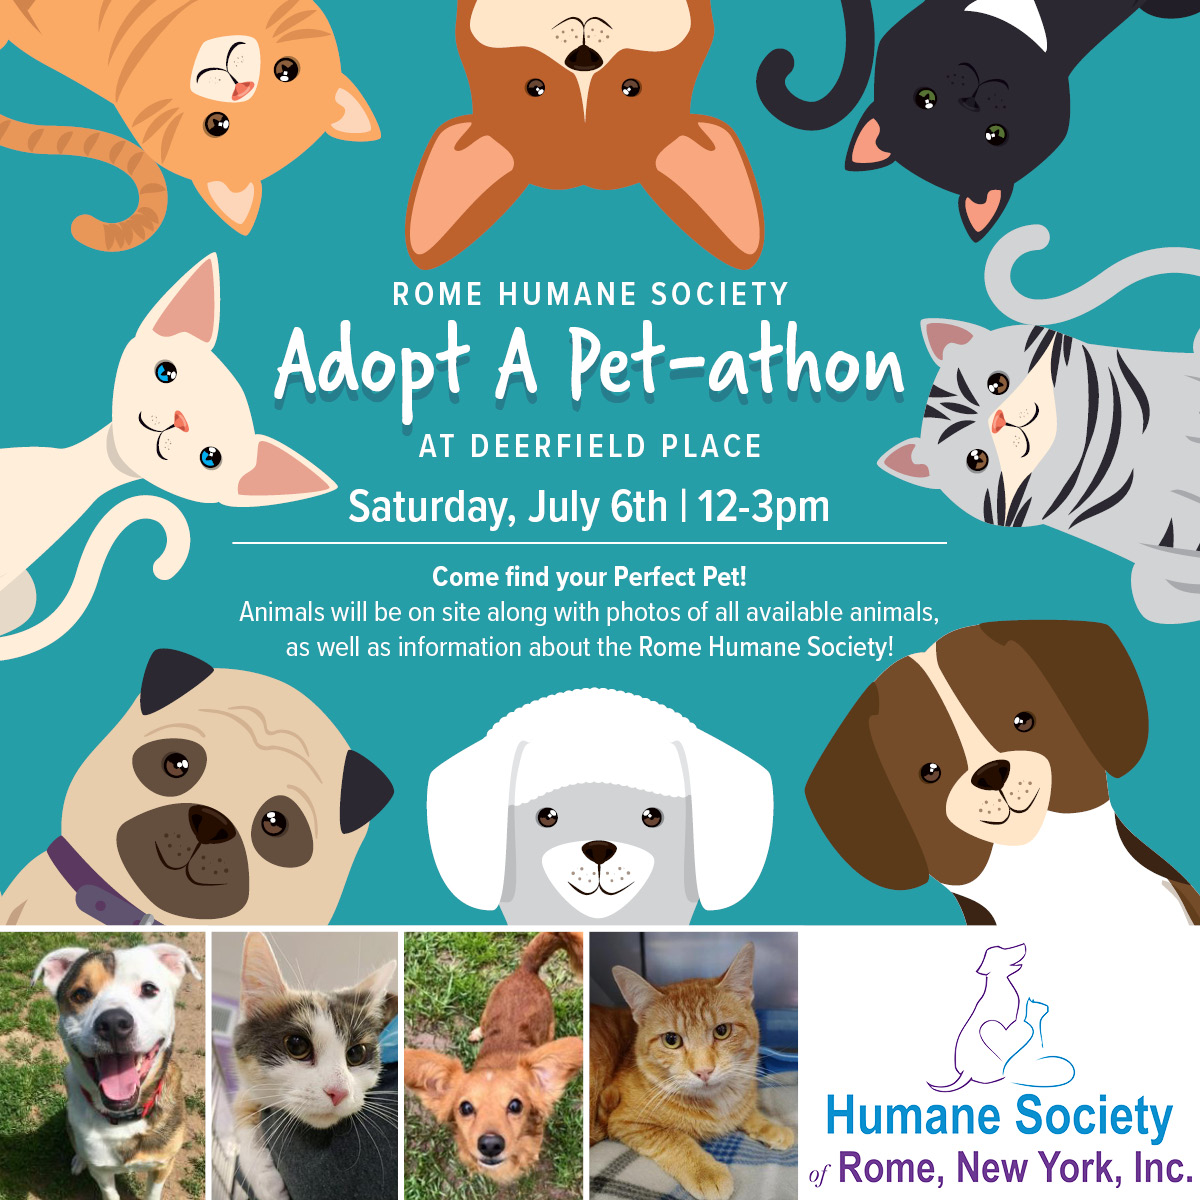 Deerfield Place Adopt A Pet-athon – Humane Society of Rome